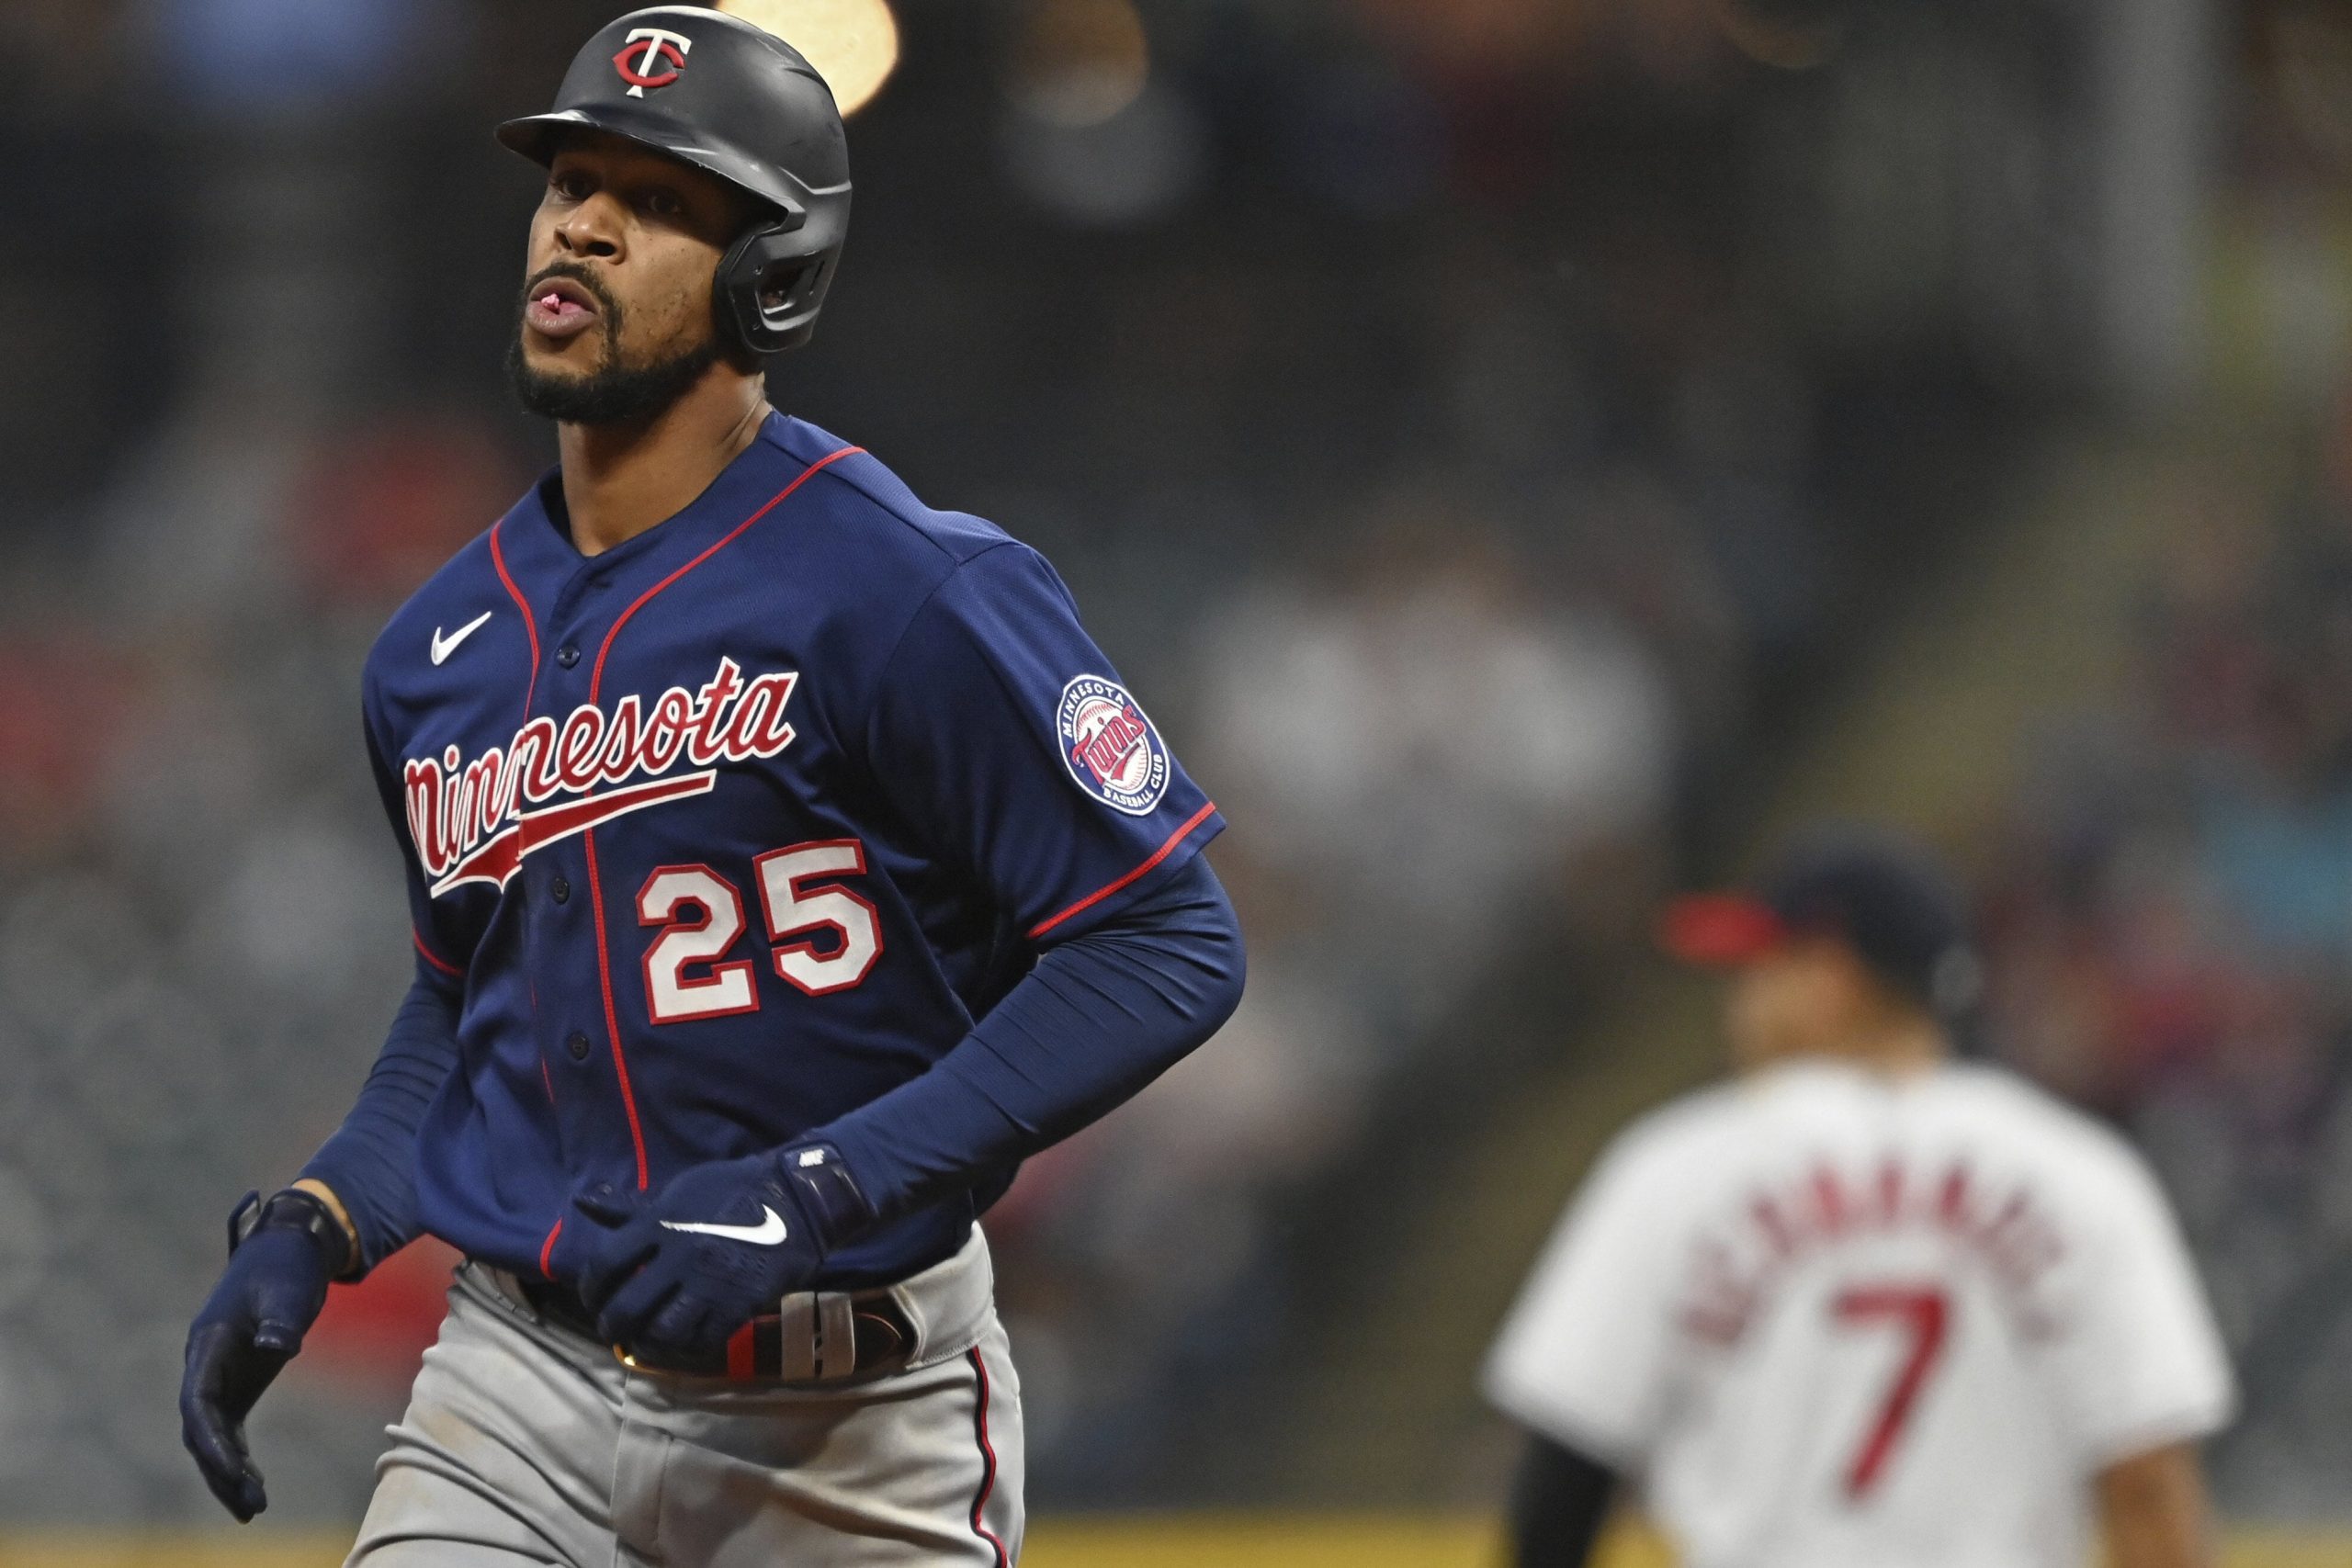 Minnesota Twins' Byron Buxton (25) runs the bases after hitting a solo home run off Cleveland Indians starting pitcher Aaron Civale (43) in the eighth inning of a baseball game, Tuesday, April 27, 2021, in Cleveland.